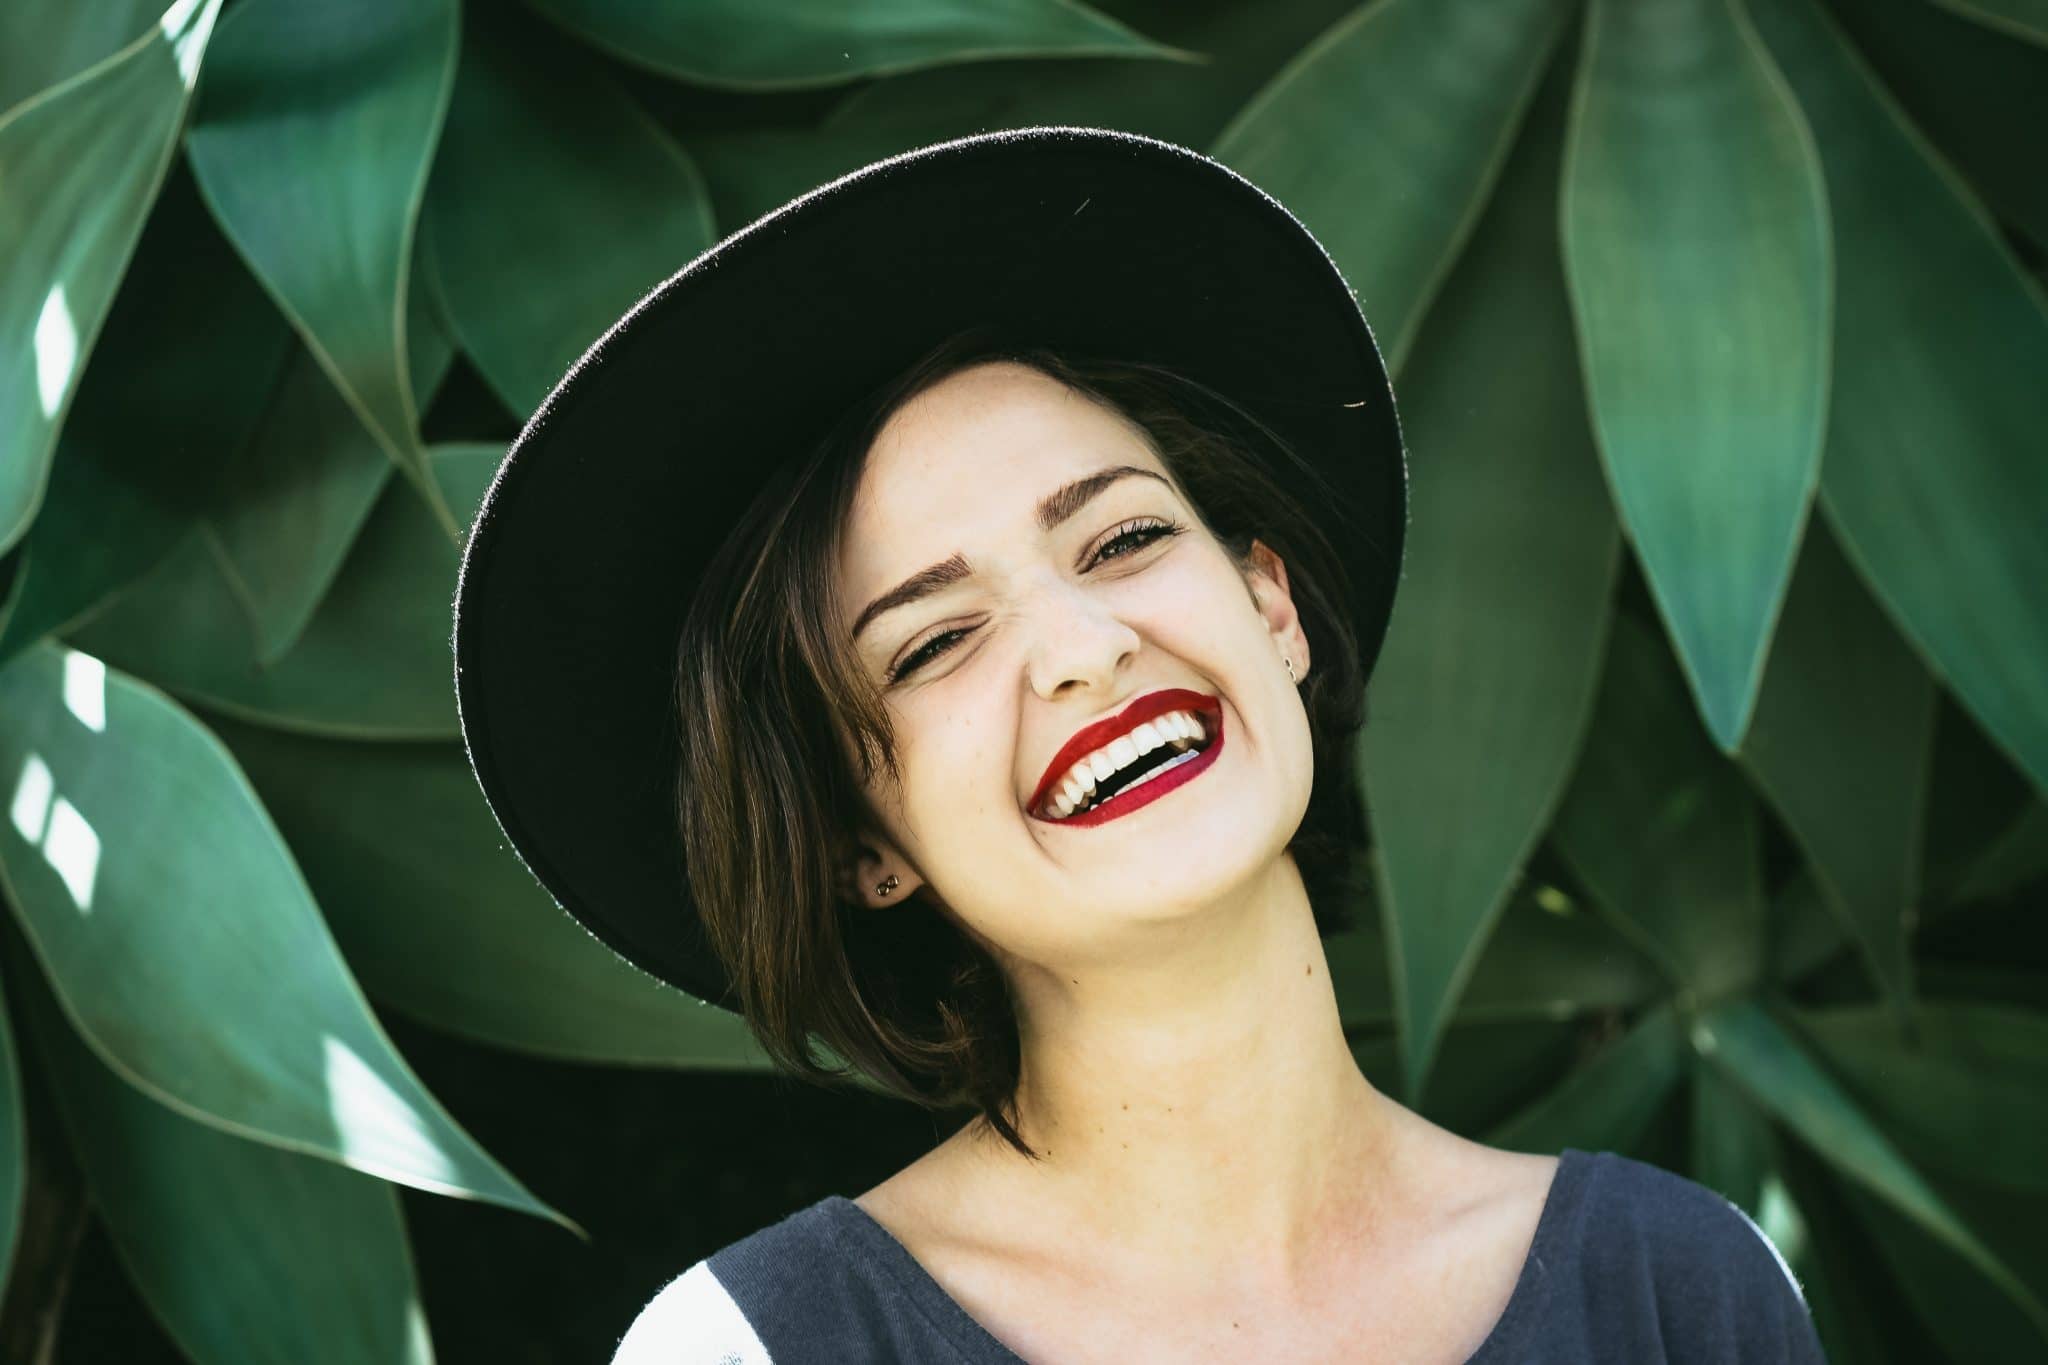 Photo of a woman wearing a stylish hat and smiling whilst standing in front a green plant.